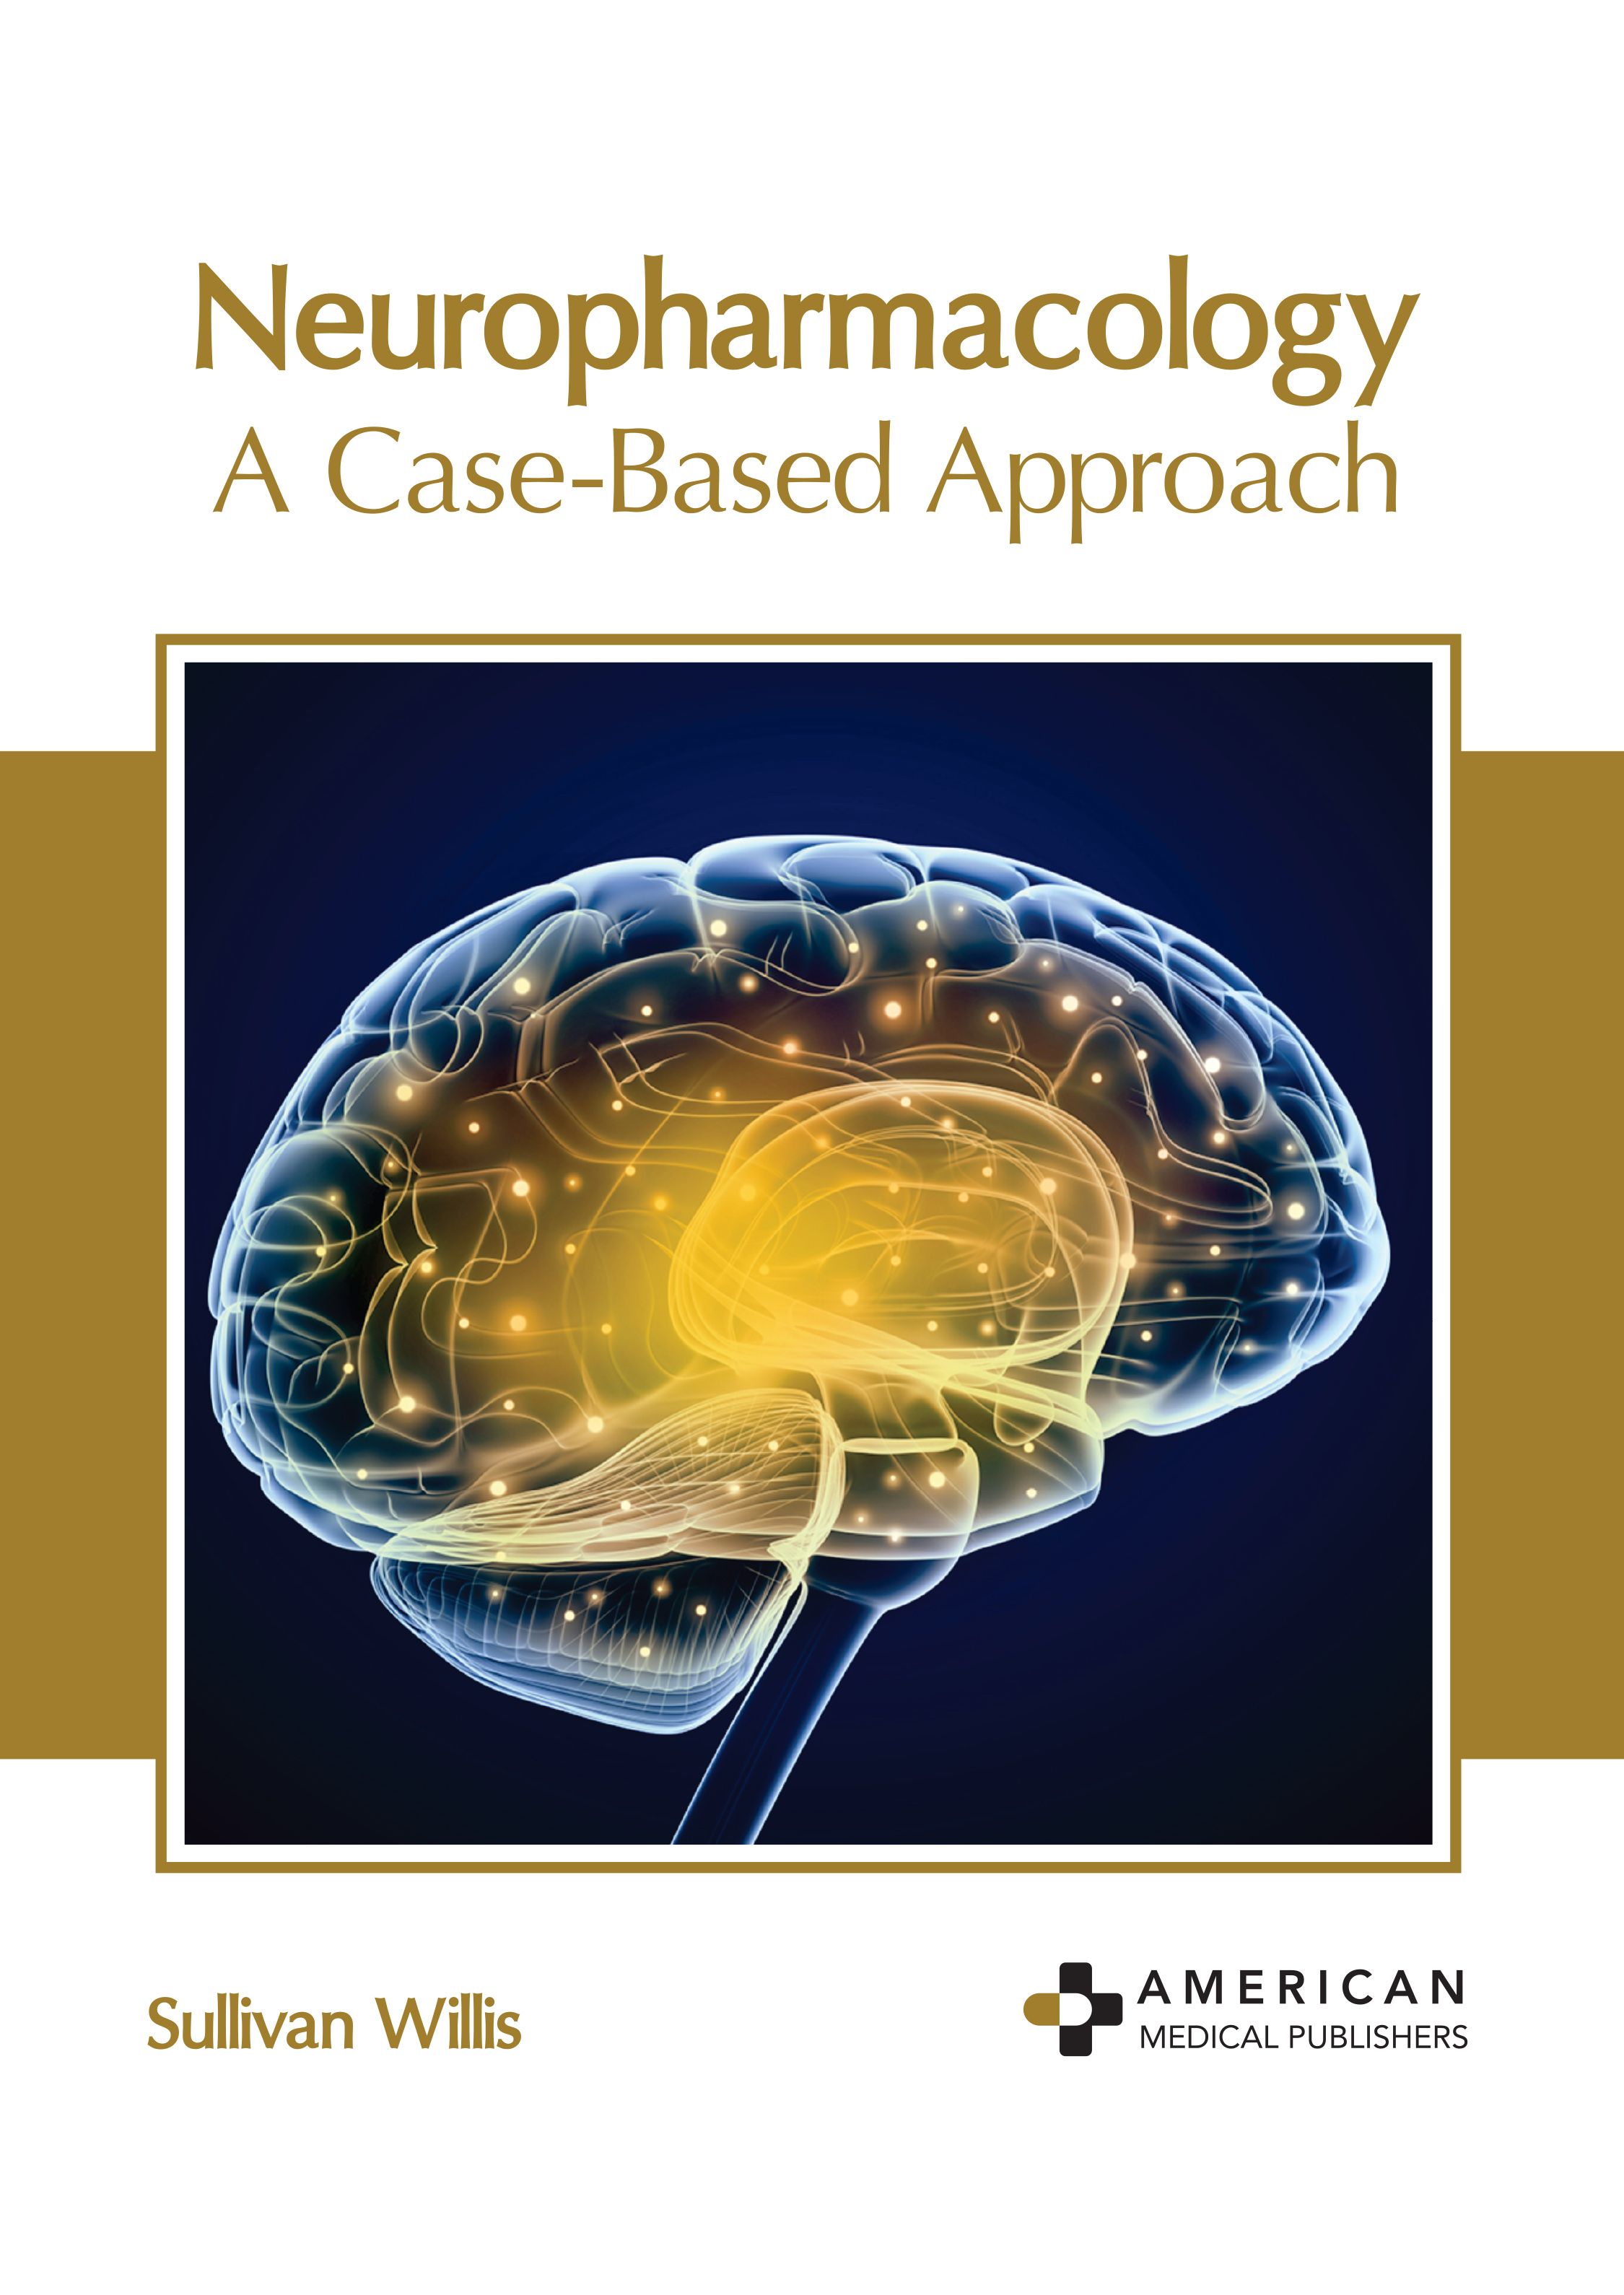 NEUROPHARMACOLOGY: A CASE-BASED APPROACH